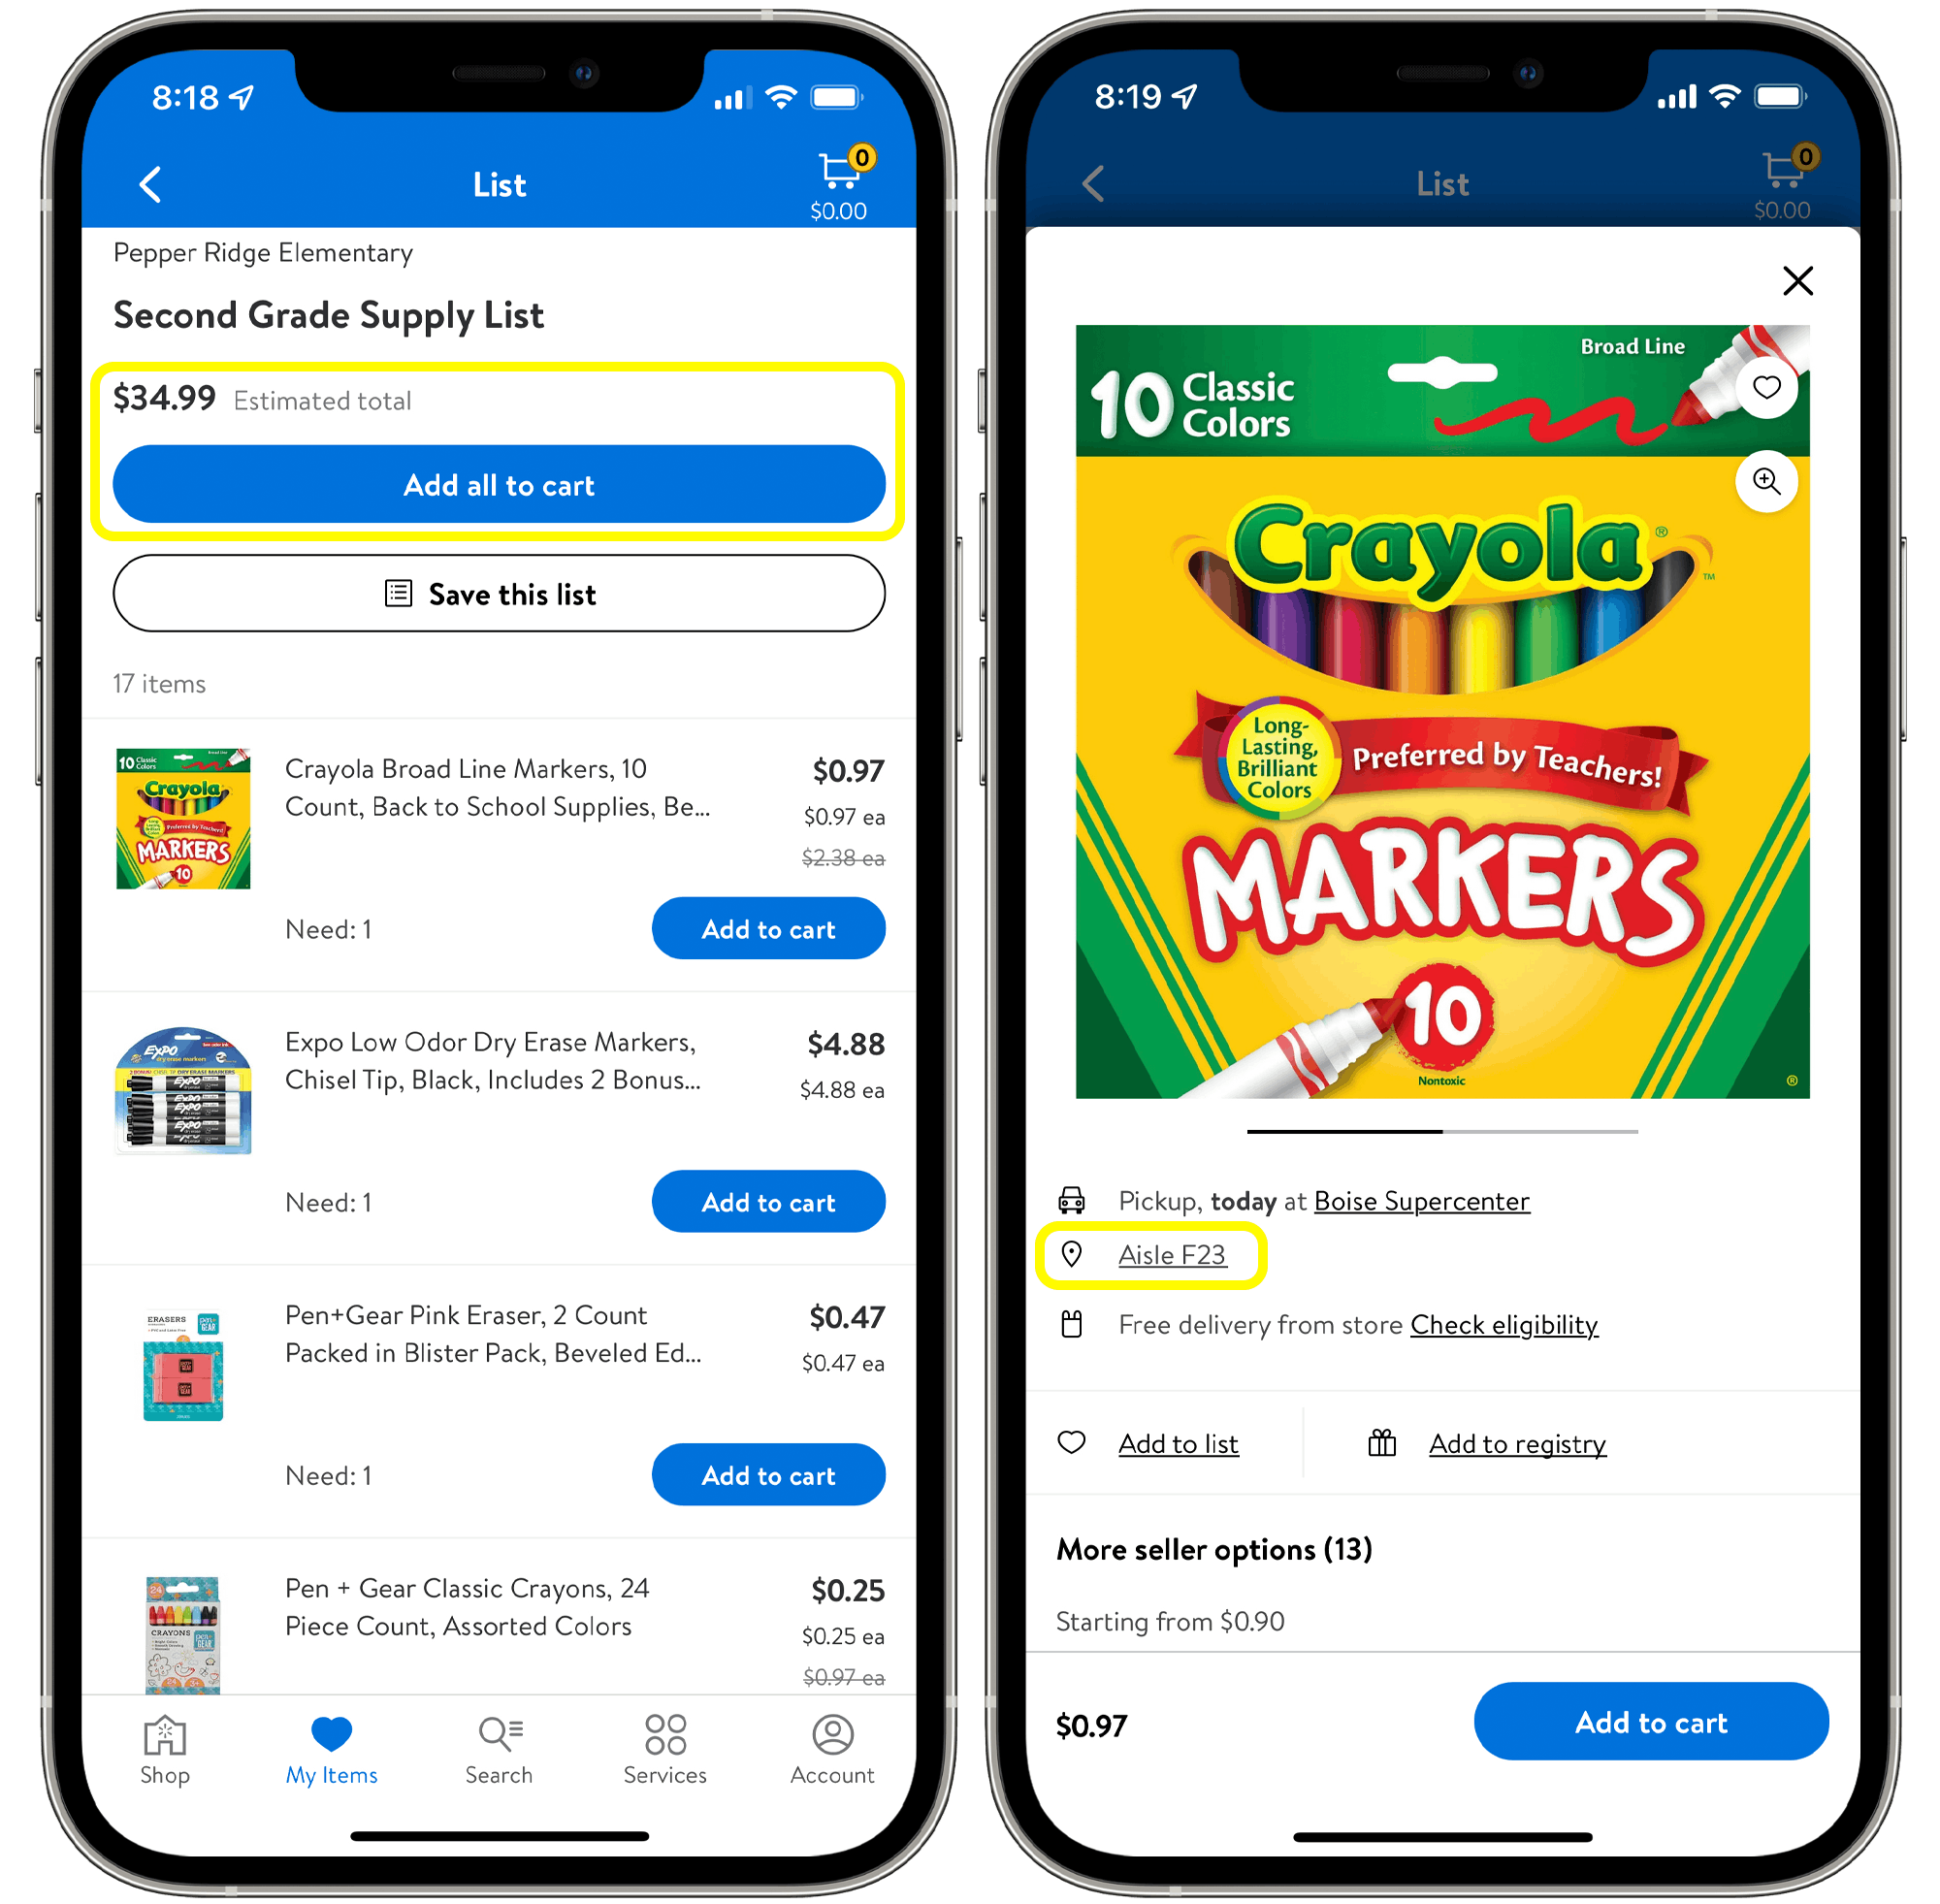 The walmart app featuring products from a second grade school supply list.